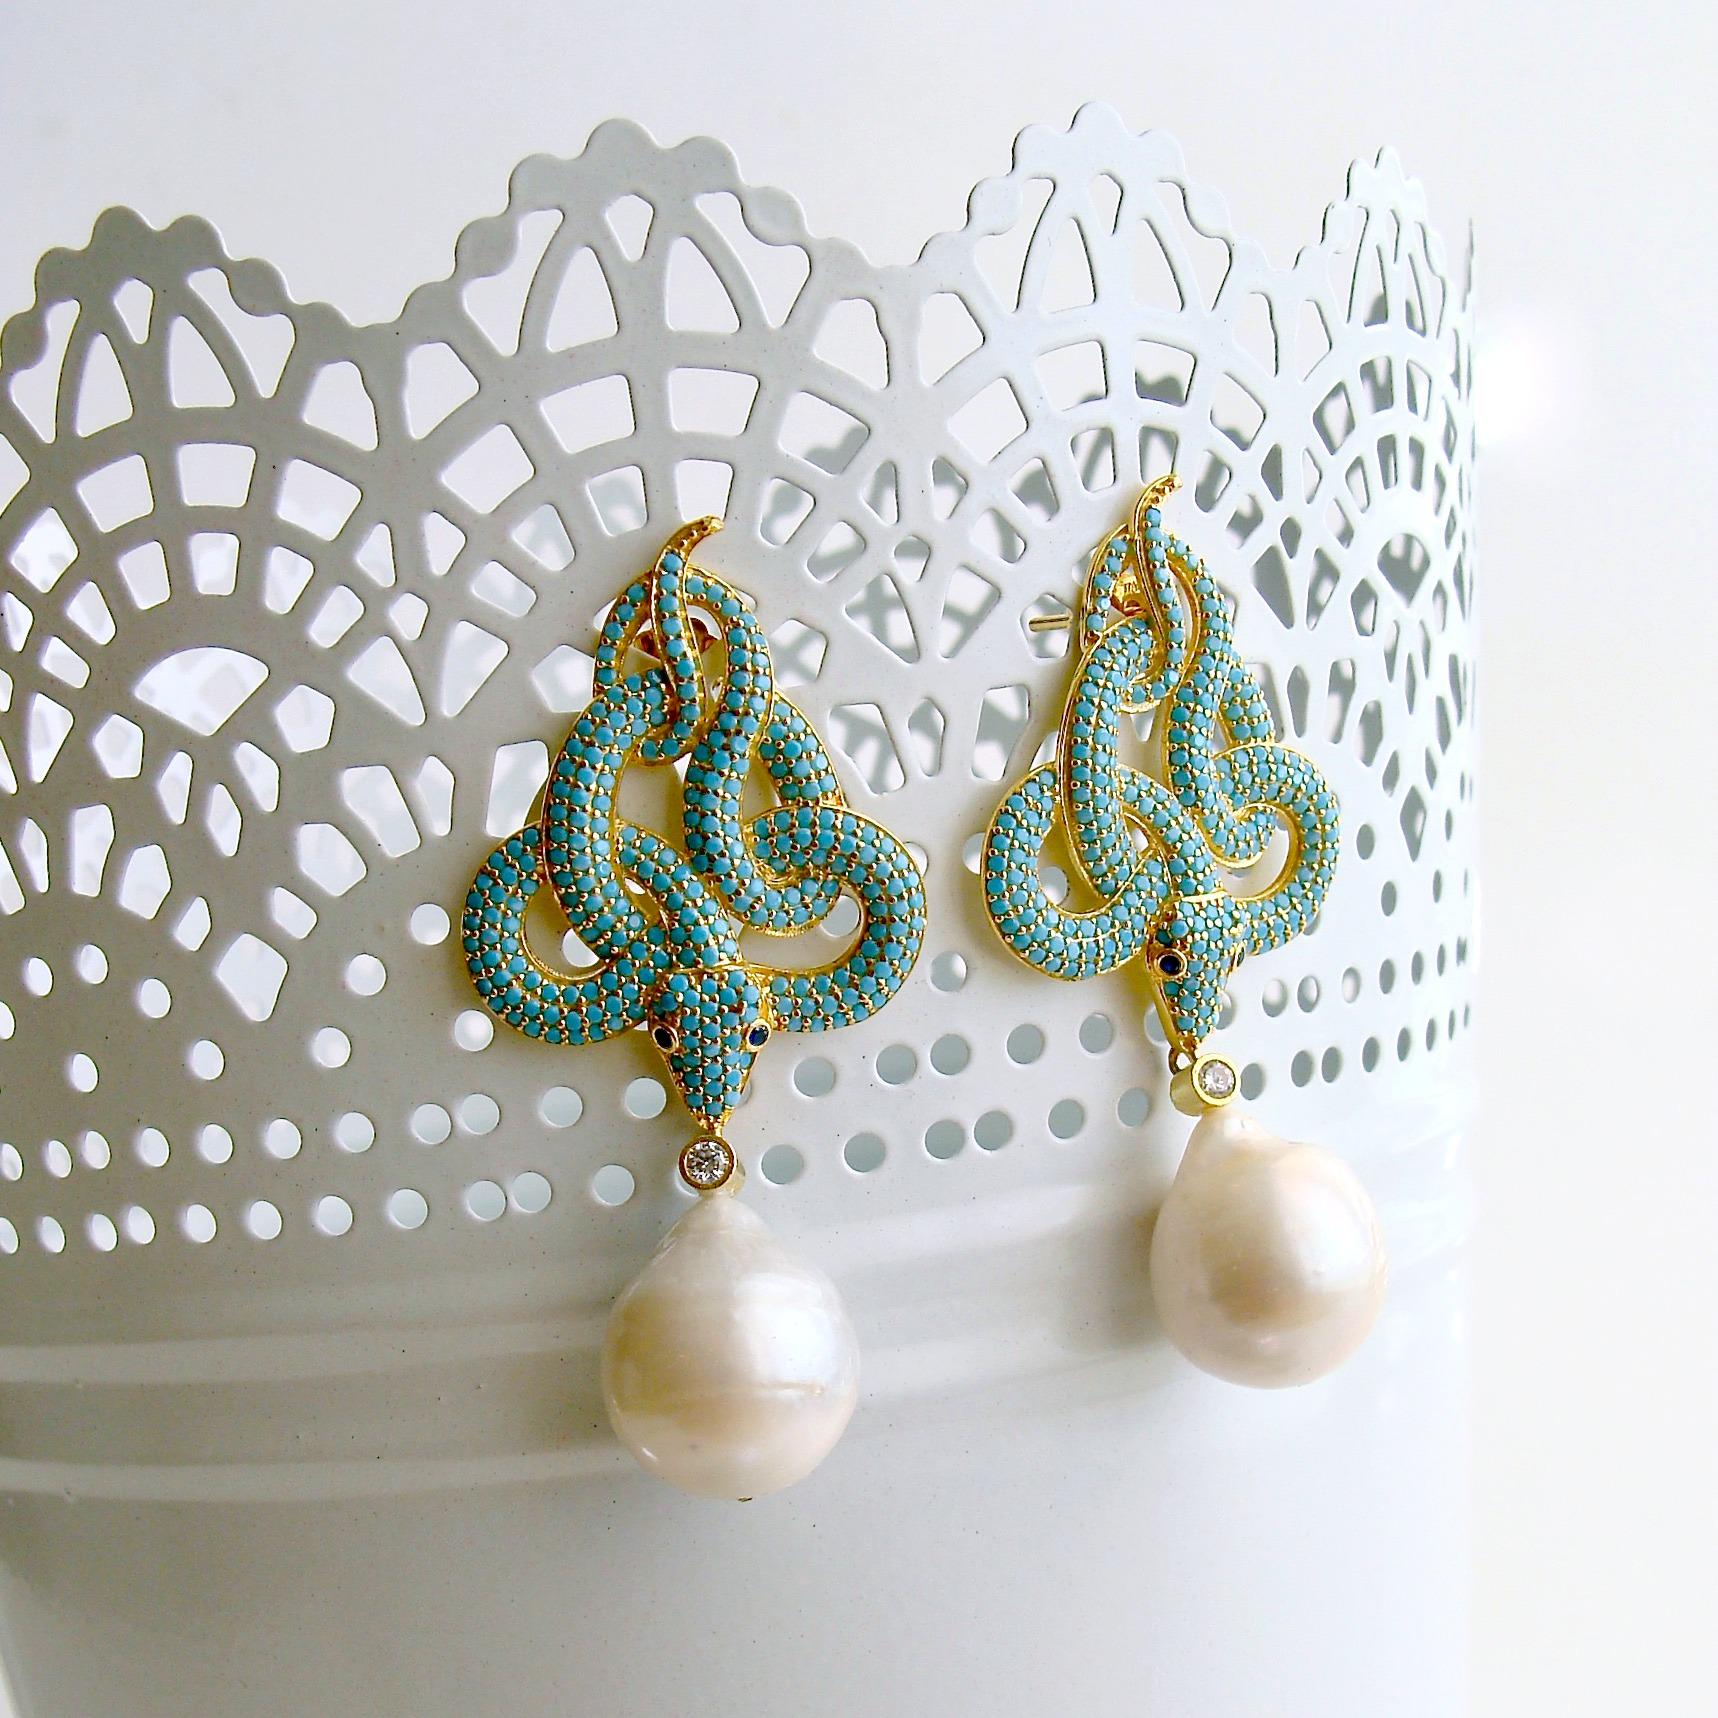 A unique pair of intertwined snake earrings, reminiscent of the Victorian style, is covered in pave set turquoise crystal and dangles with generous baroque freshwater pearls.  These post-style earrings are clearly not for the faint of heart and